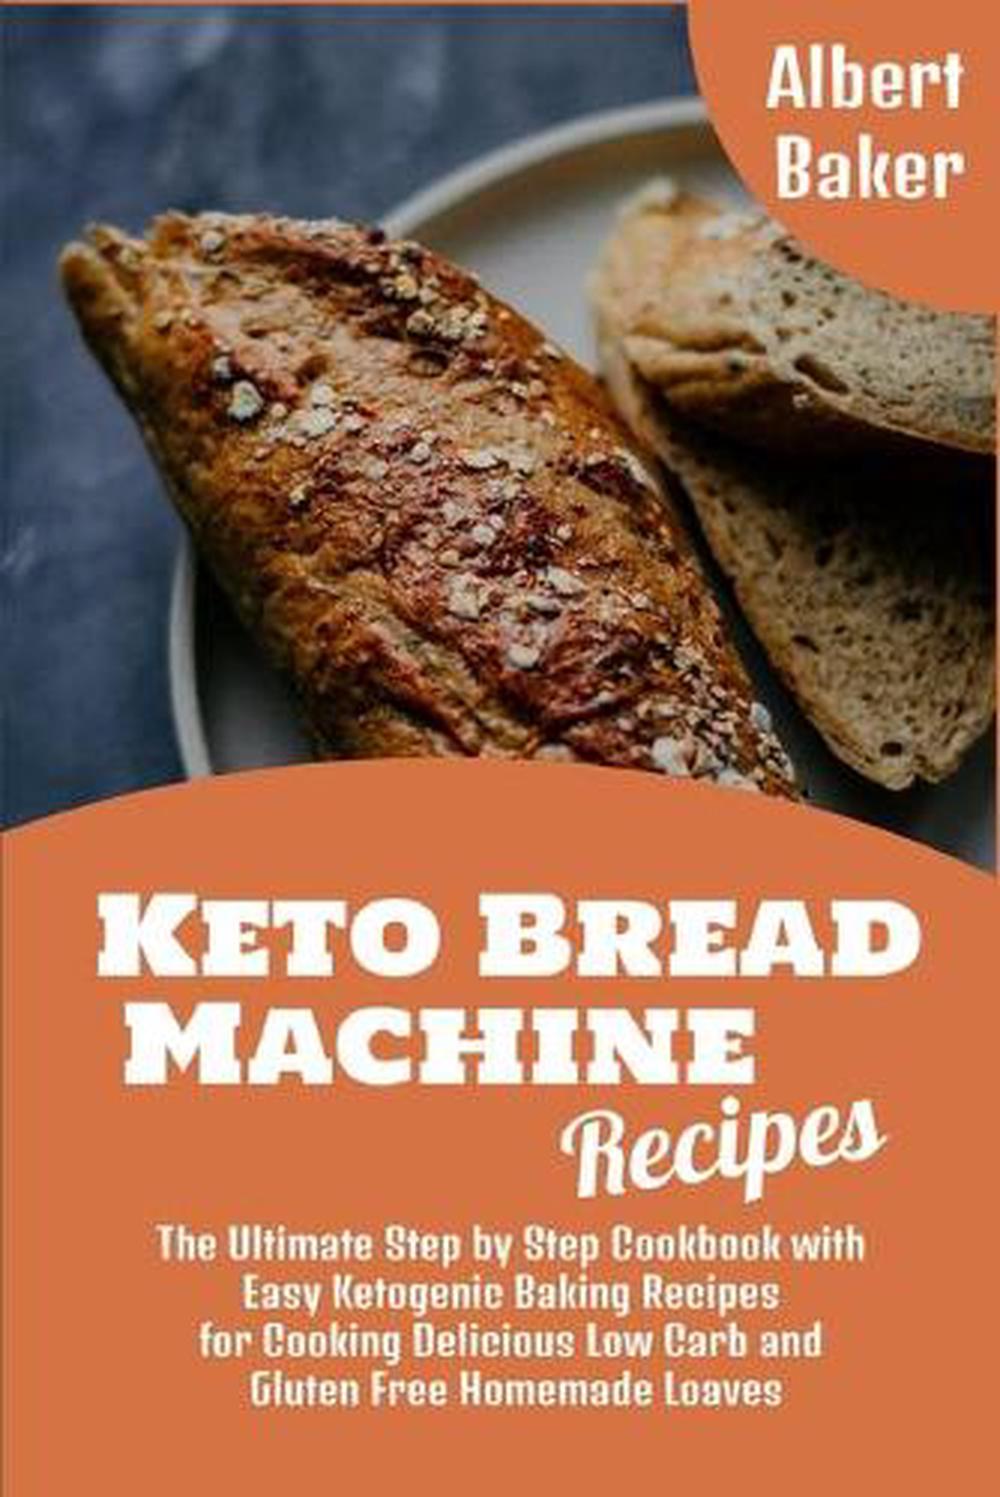 Keto Bread Machine Recipes By Albert Baker Paperback 9781801827669 Buy Online At Moby The Great